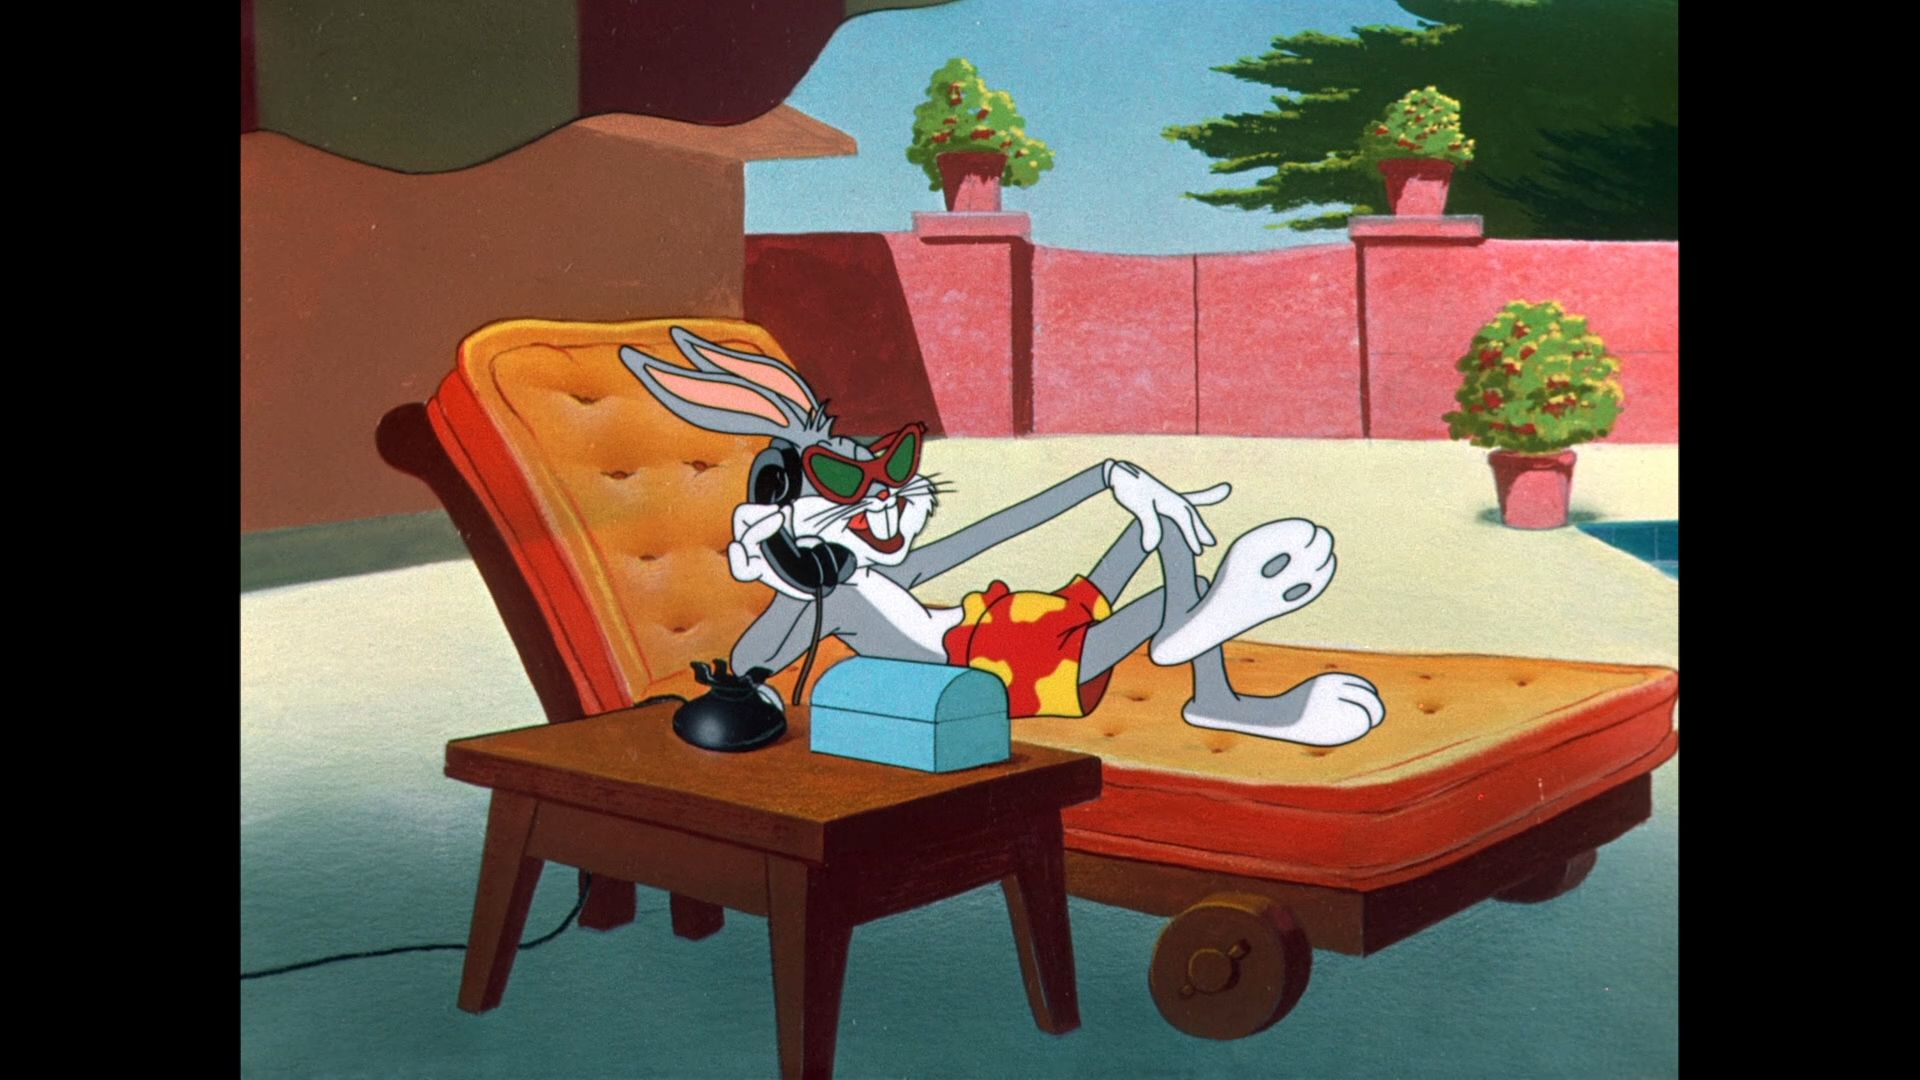 A still shot from a Looney Tunes Cartoon. Bugs Bunny lies back on a poolside plush orange beach chaise. He's wearing cat-eye sunglasses and patterned swim shorts, and is grinning as he speaks into an old-fashioned corded telephone set up on a table beside him. In the background he's surrounded by a brick wall and some fancy potted plants.